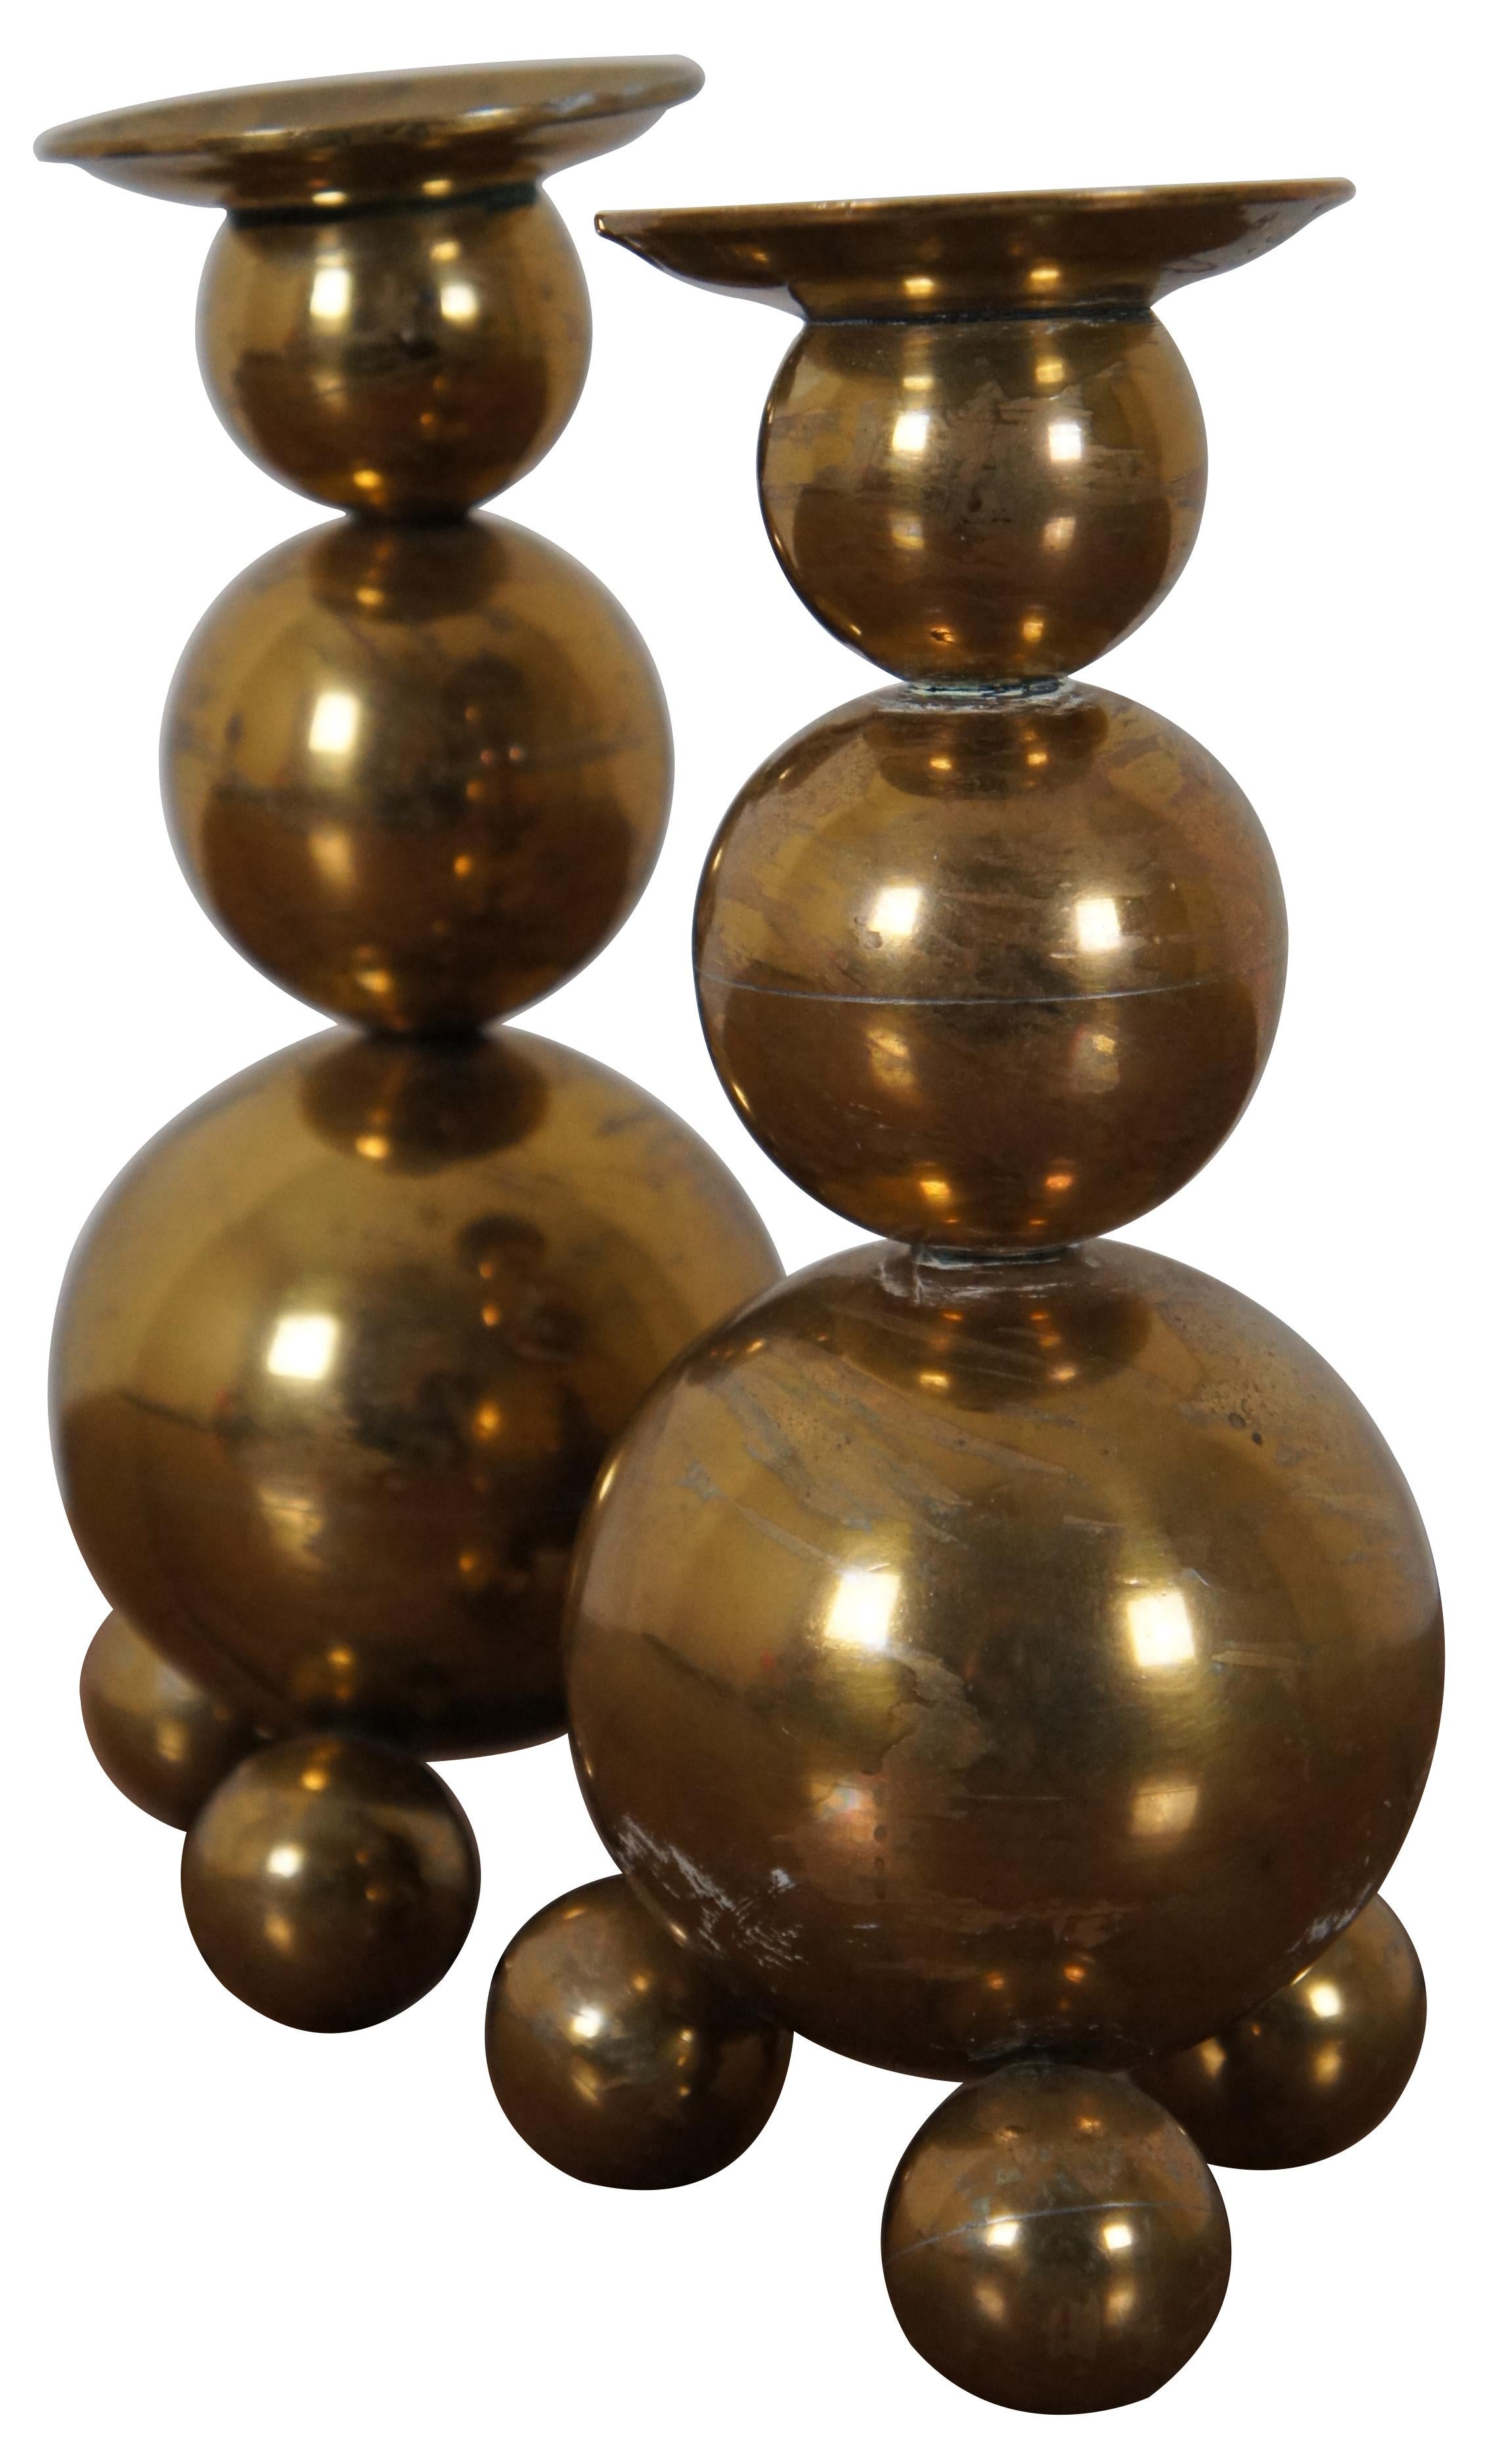 Vintage Modern Swedish Gusums Bruk 029 brass candlesticks, fashioned from three graduated balls stacked on each other, supported by three ball feet. circa 1980s. Measures: 6.5